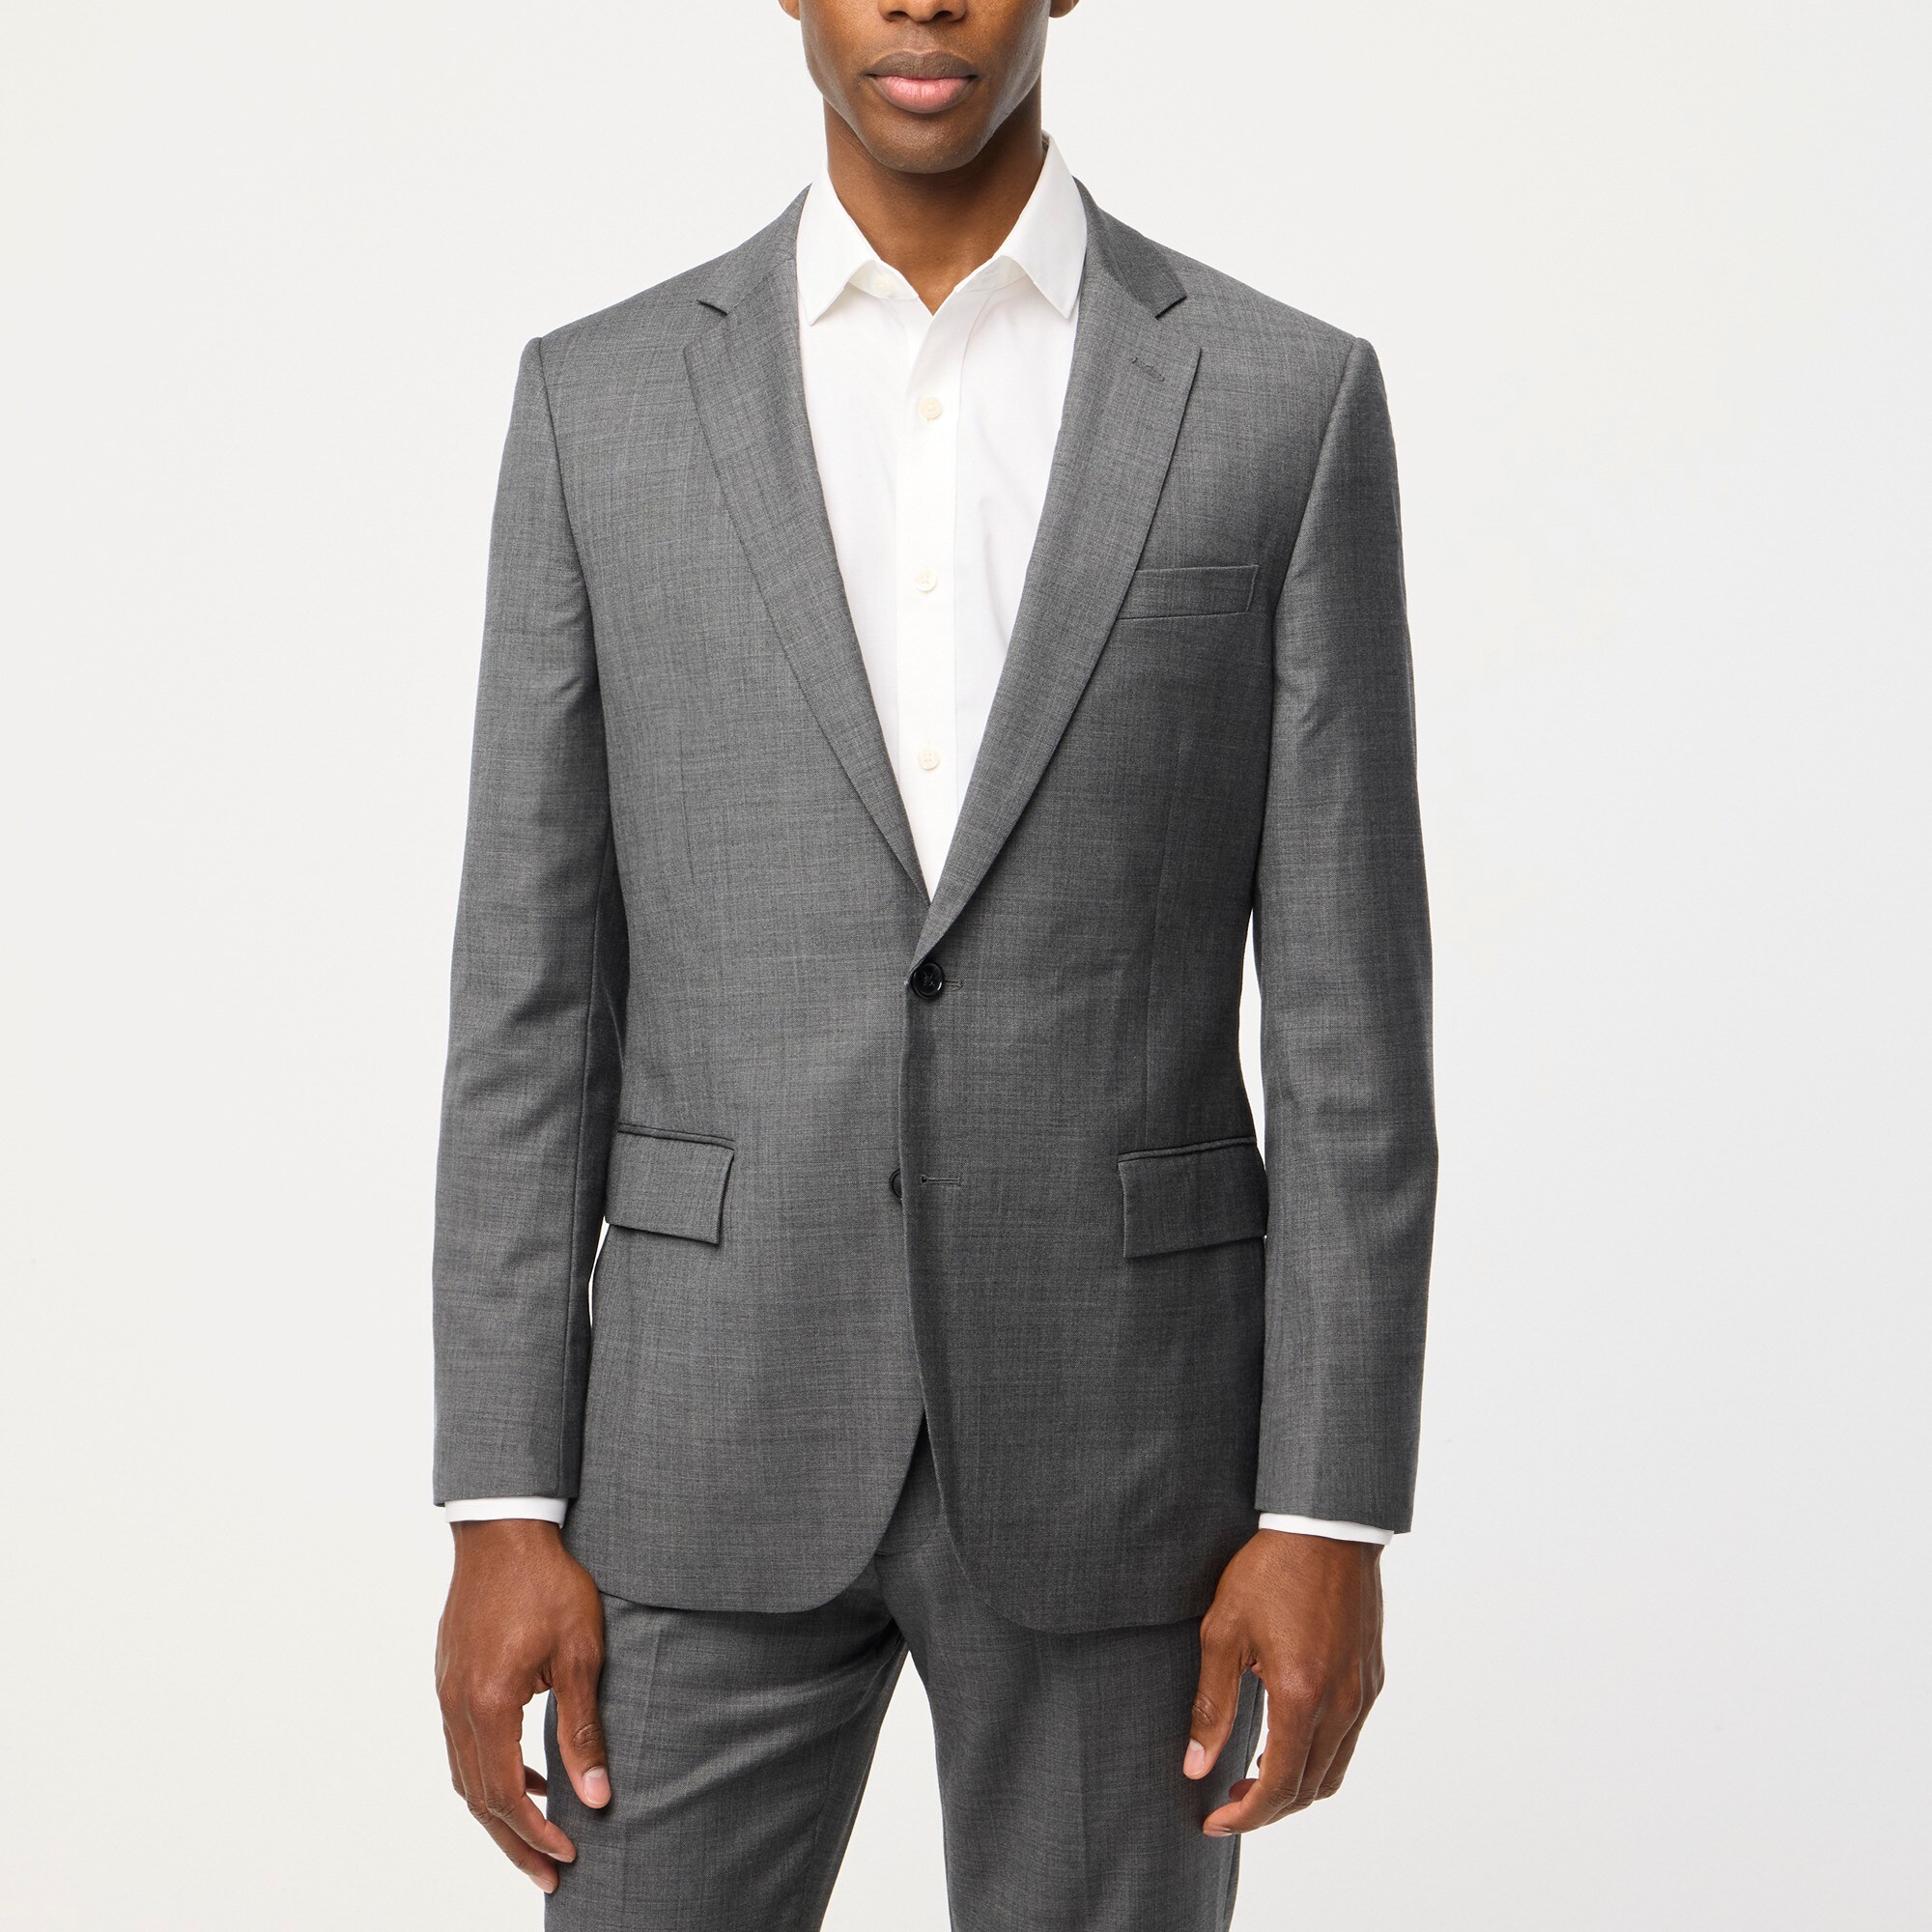  Thompson suit jacket in worsted wool